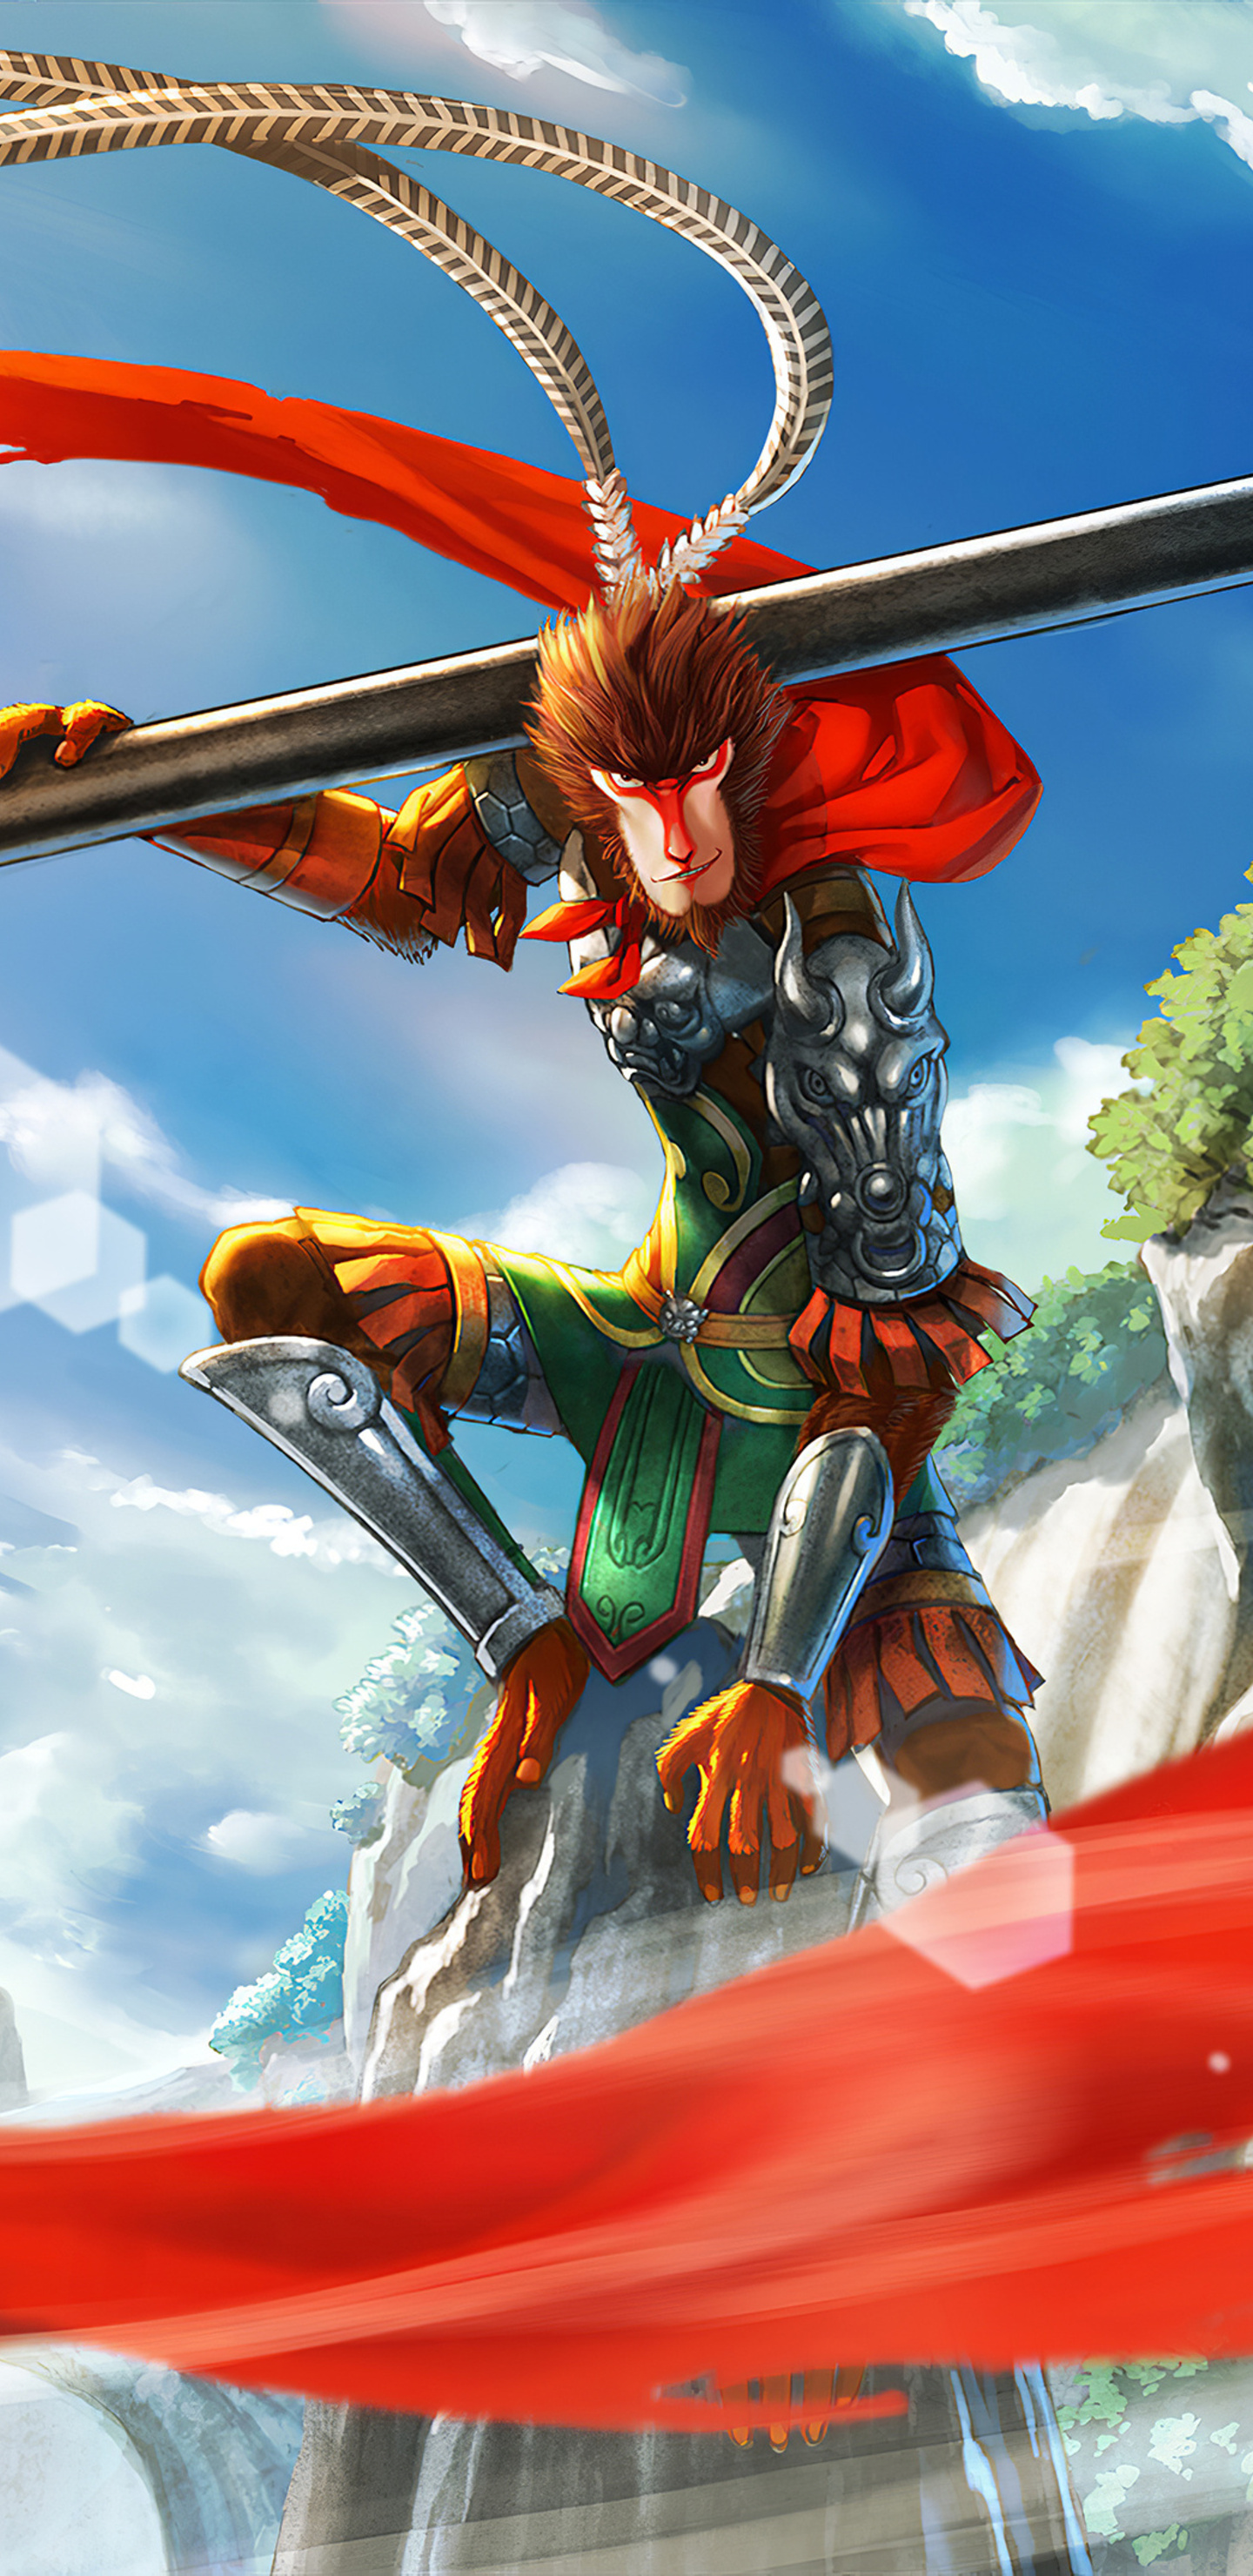 1440x2960 Monkey King Hero Is Back 2019 Samsung Galaxy Note 9,8, S9,S8,S8+  QHD HD 4k Wallpapers, Images, Backgrounds, Photos and Pictures